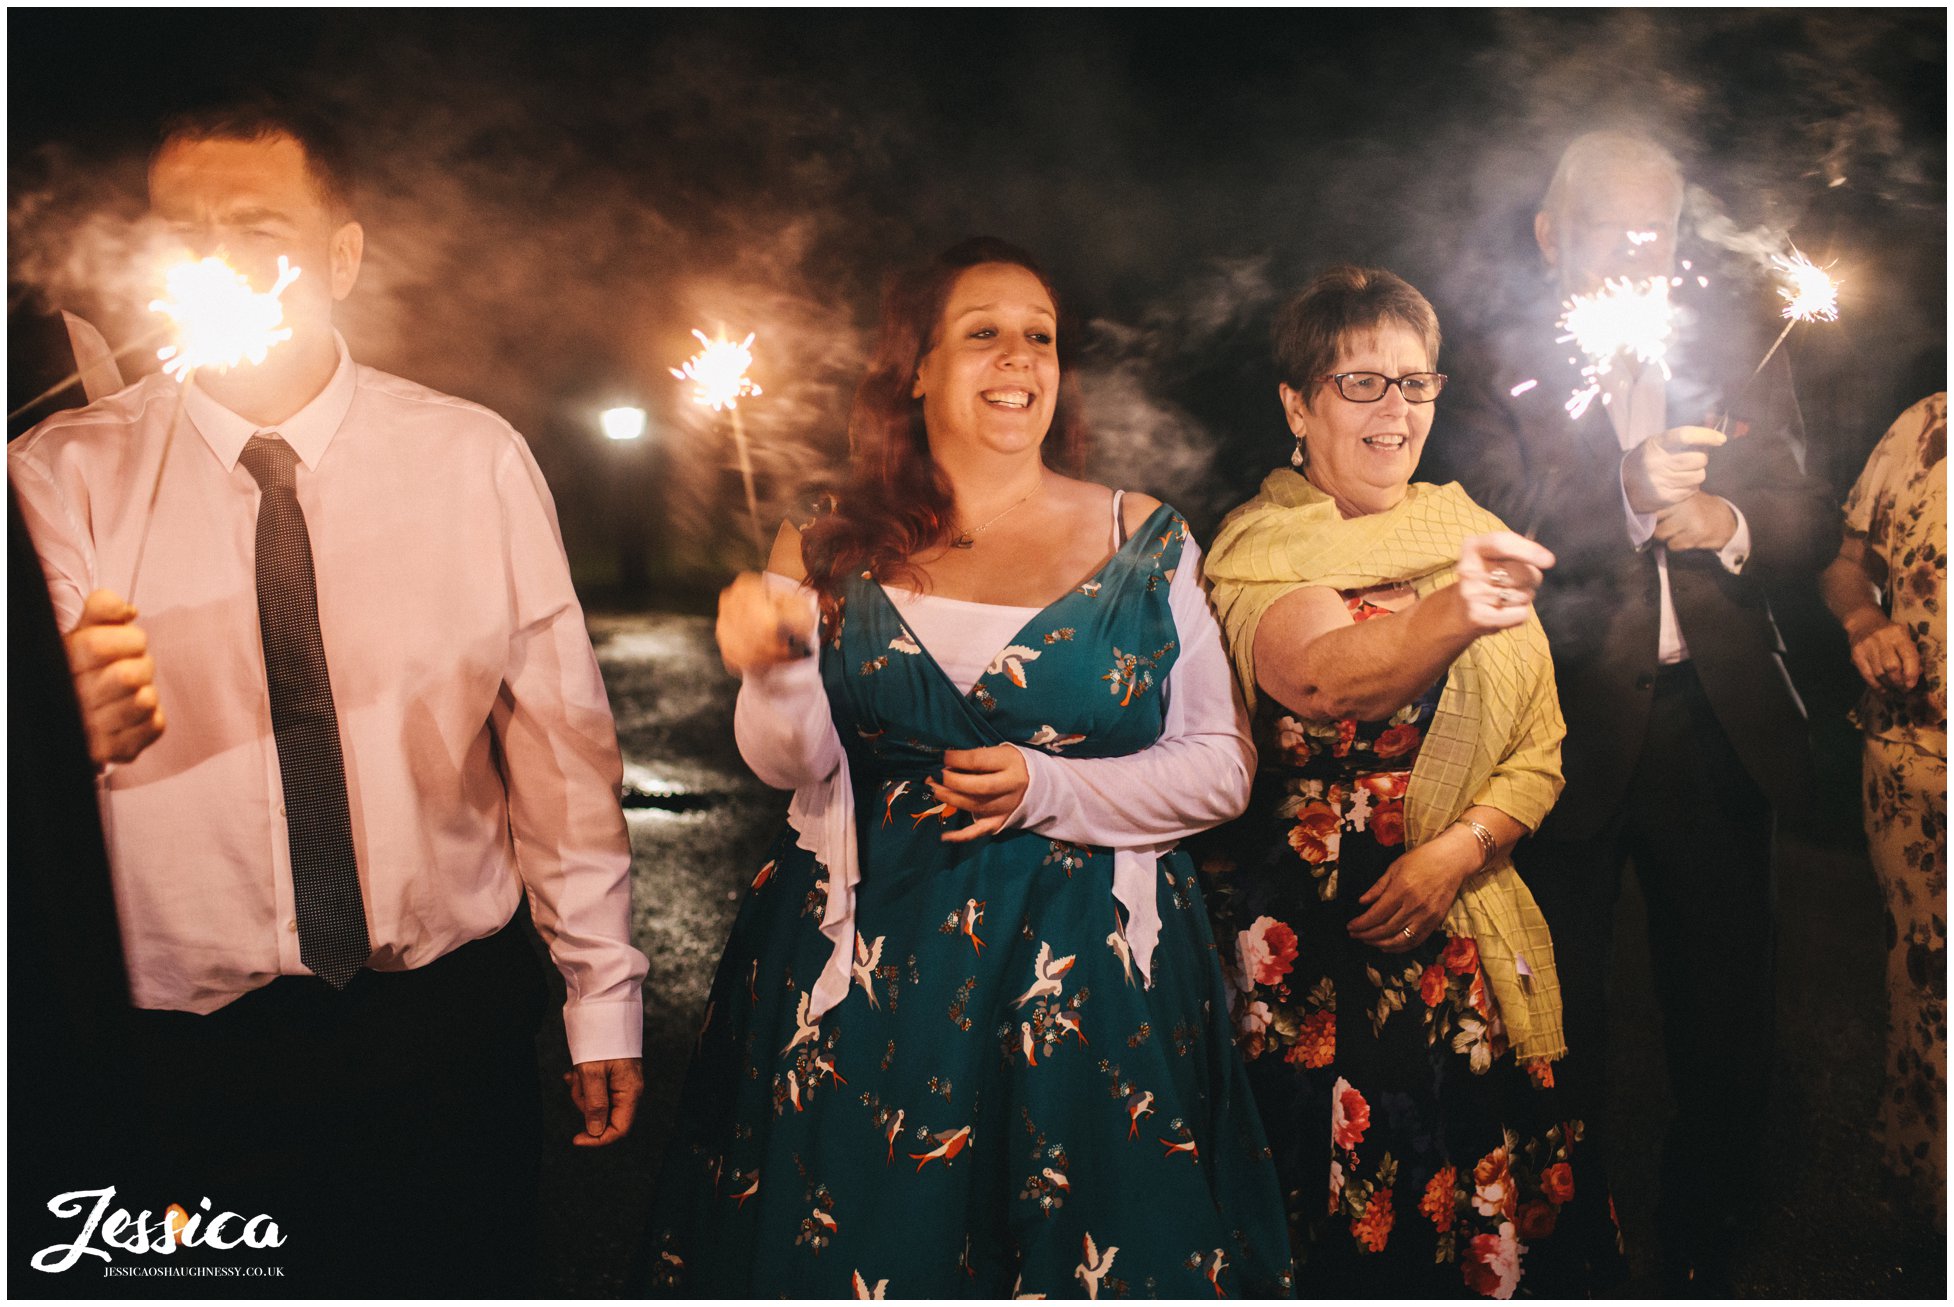 guests hold sparklers to light bride and groom